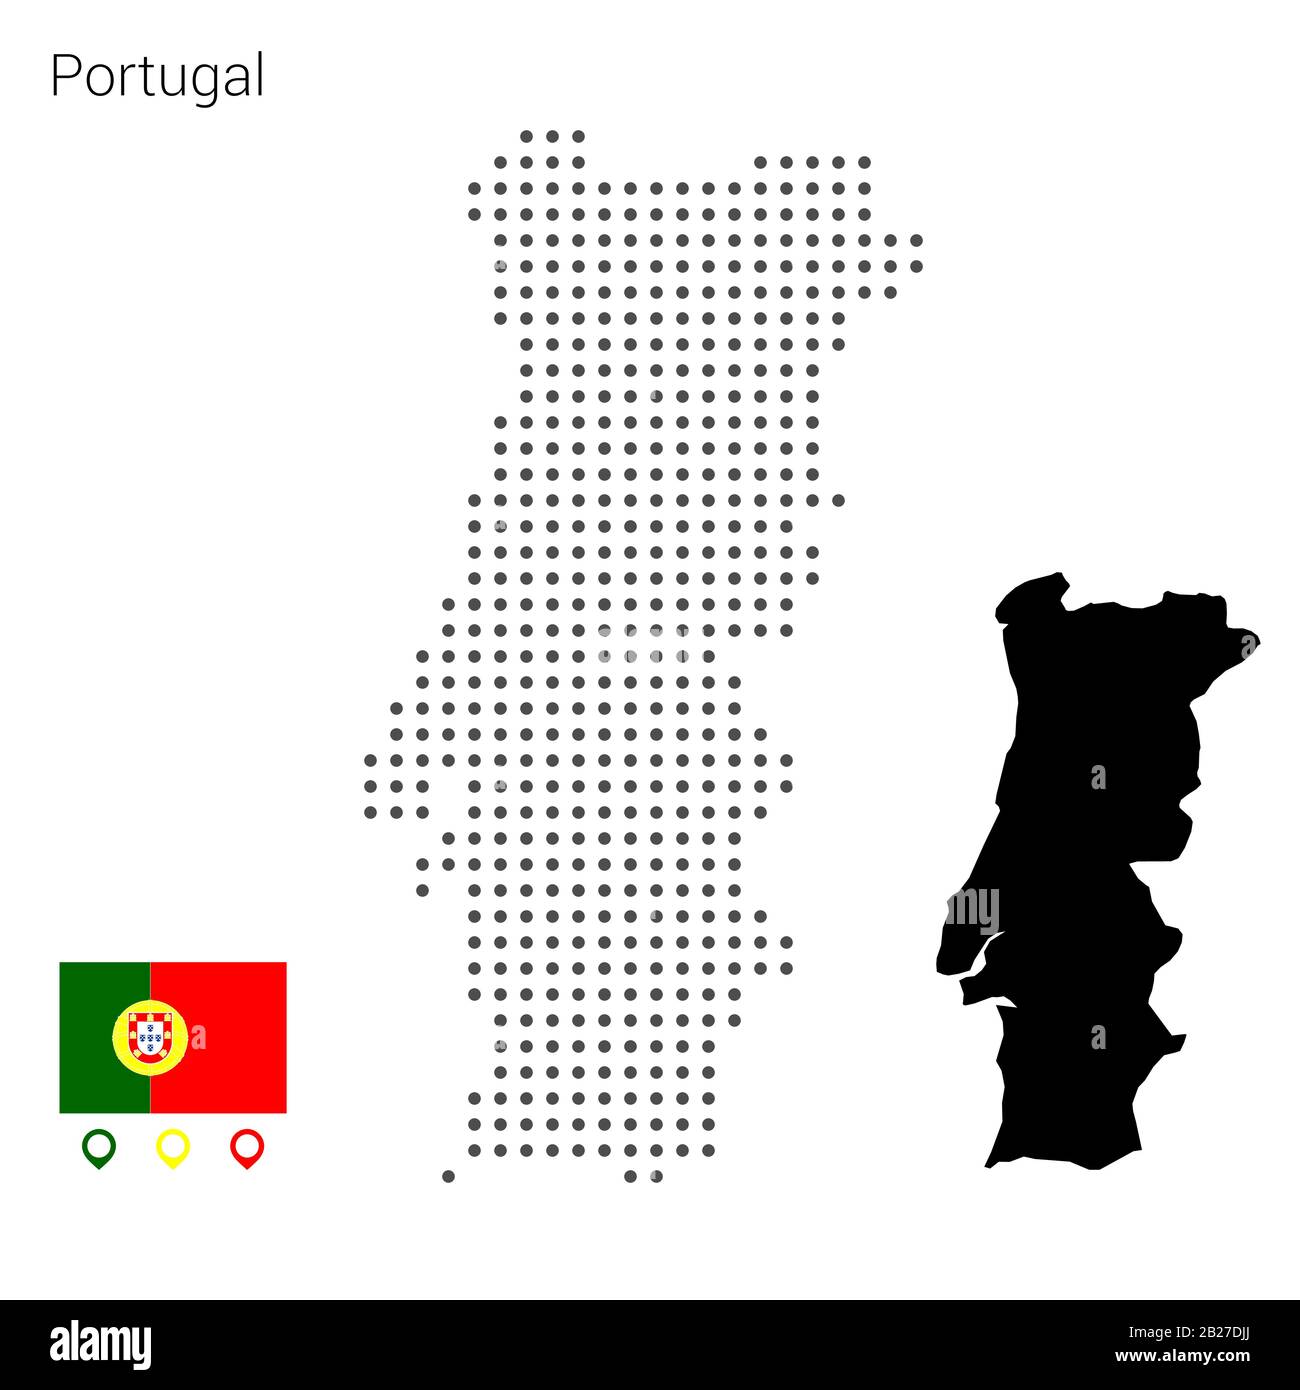 High Quality Labeled Map of Portugal with Borders of the Regions Stock  Illustration - Illustration of administrative, color: 207609735